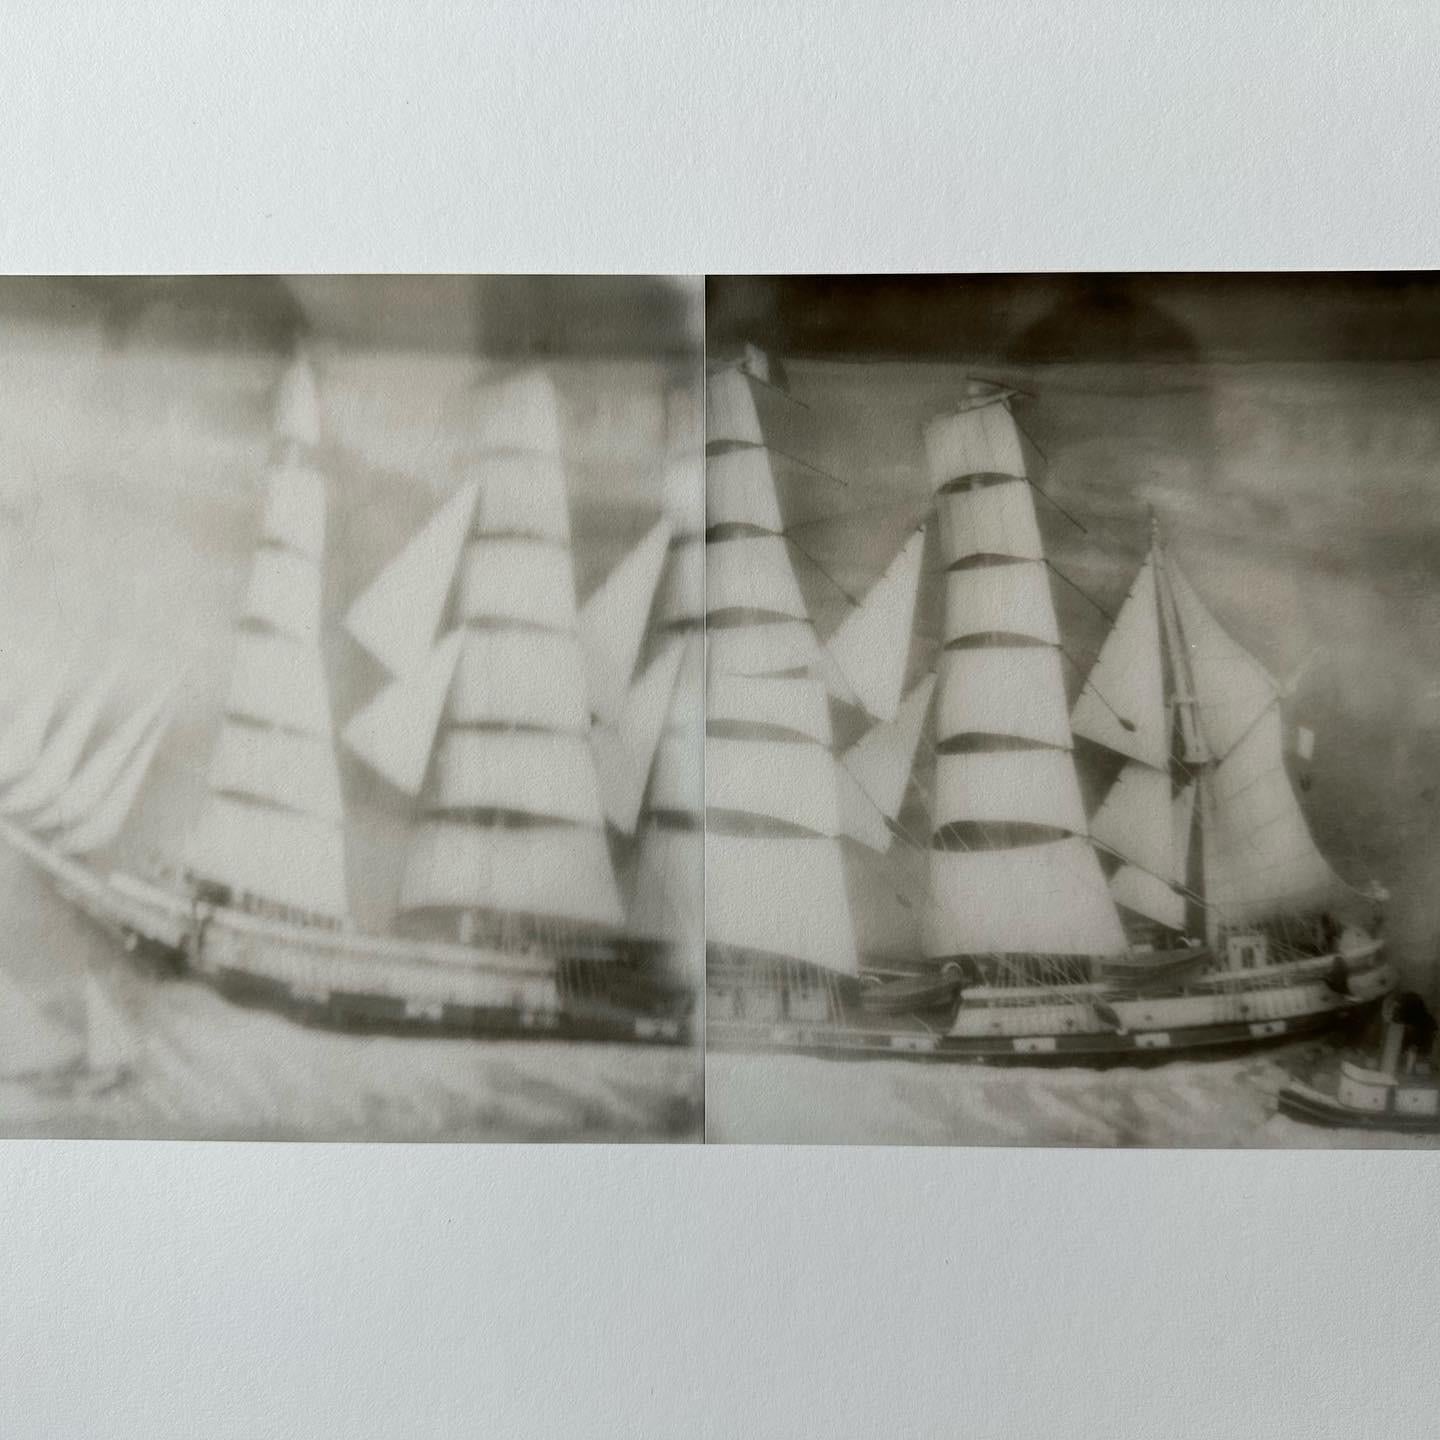 Catherine Just Still-Life Photograph - Ship, from the Chasing the Fog:Learning How to Breathe Series